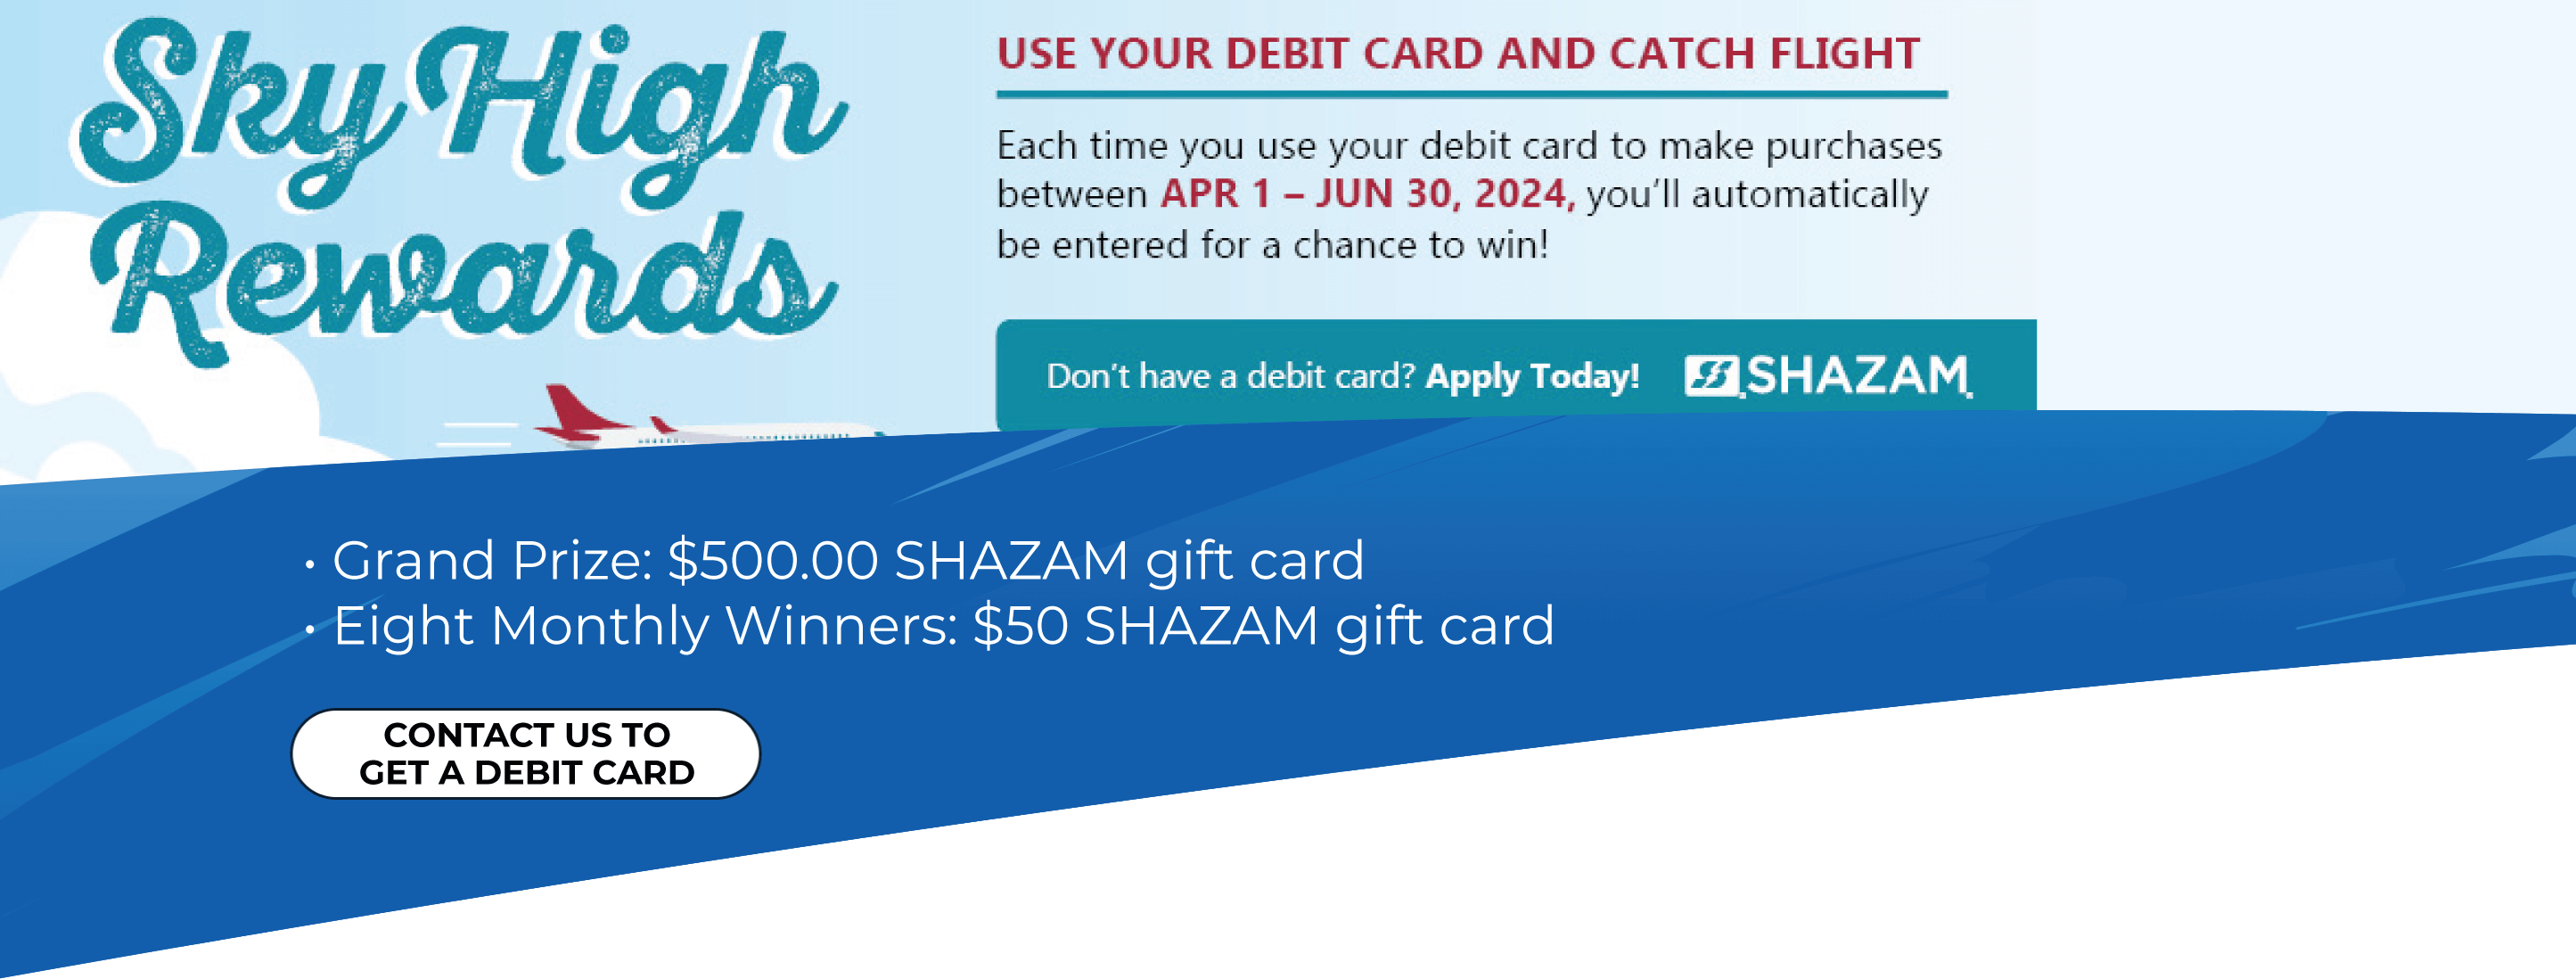 Use your CCCU debit card to win prizes